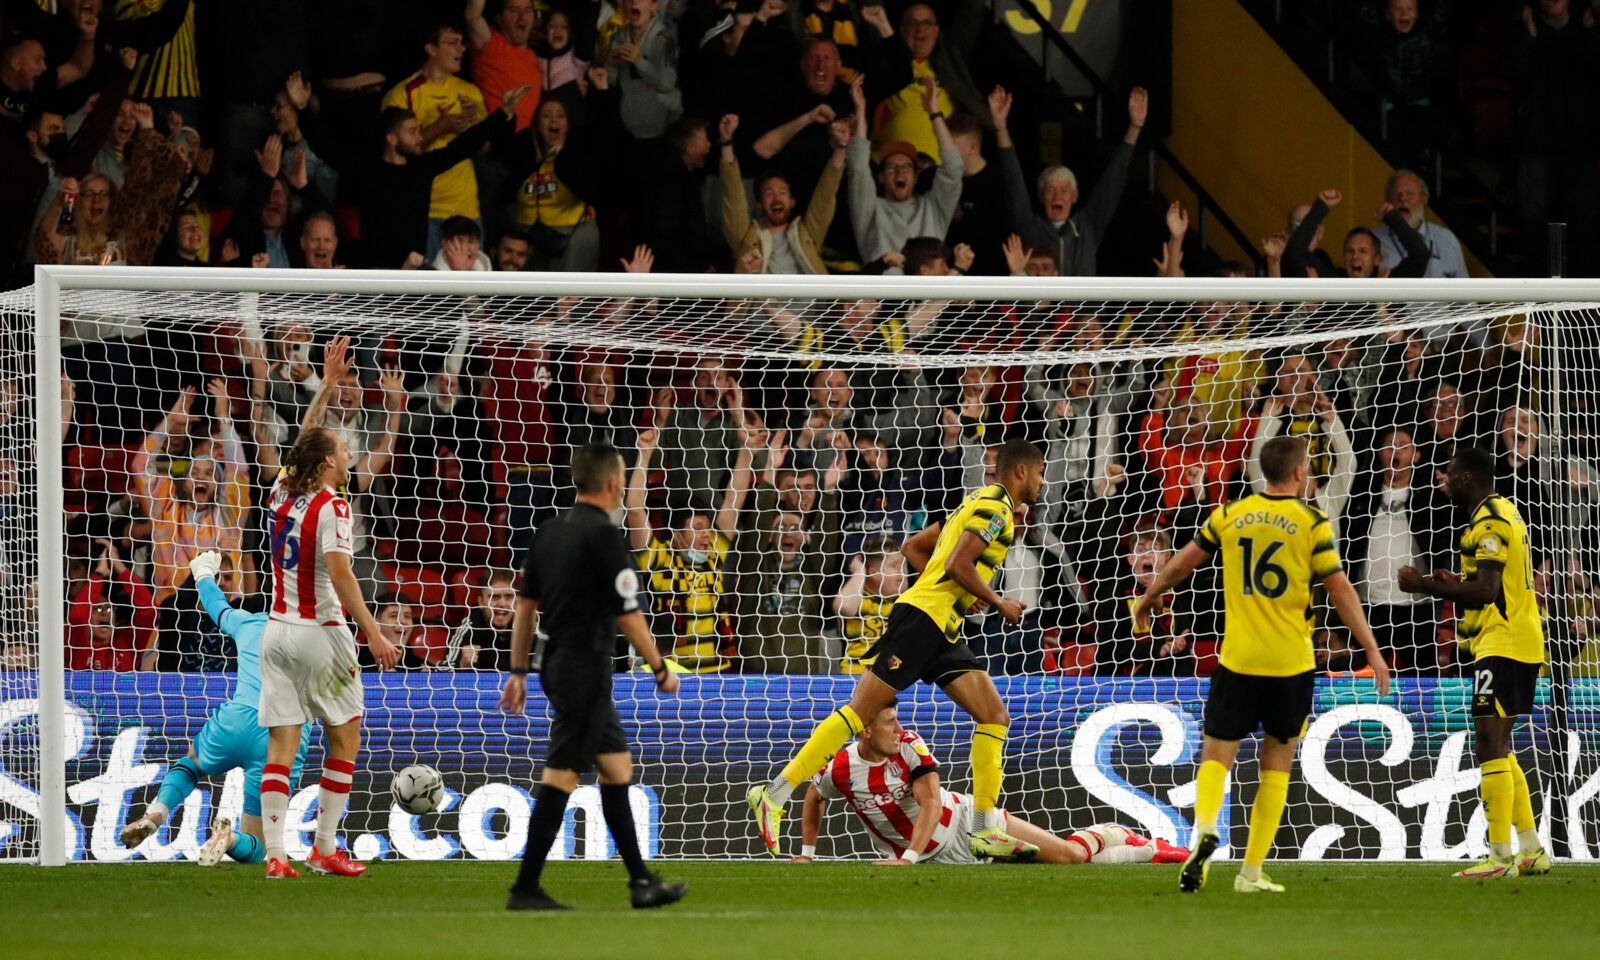 Soccer Football - Carabao Cup - Third Round - Watford v Stoke City - Vicarage Road, Watford, Britain - September 21, 2021 Watford's Ashley Fletcher celebrates scoring their first goal Action Images via Reuters/Andrew Boyers EDITORIAL USE ONLY. No use with unauthorized audio, video, data, fixture lists, club/league logos or 'live' services. Online in-match use limited to 75 images, no video emulation. No use in betting, games or single club /league/player publications.  Please contact your accoun